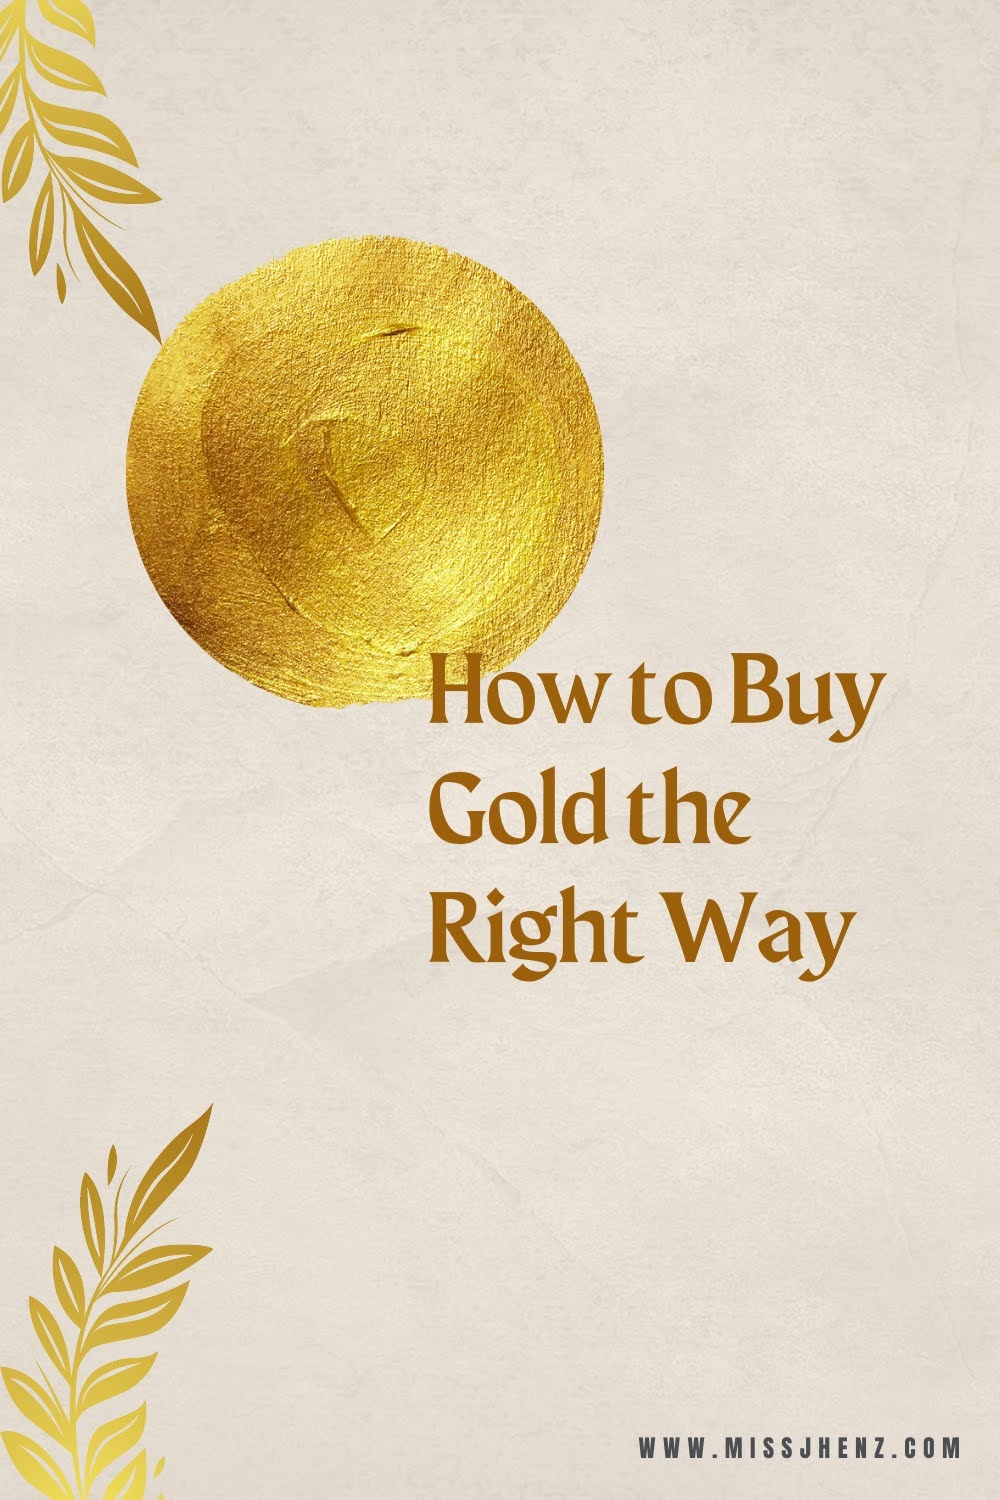 How to Buy Gold the Right Way